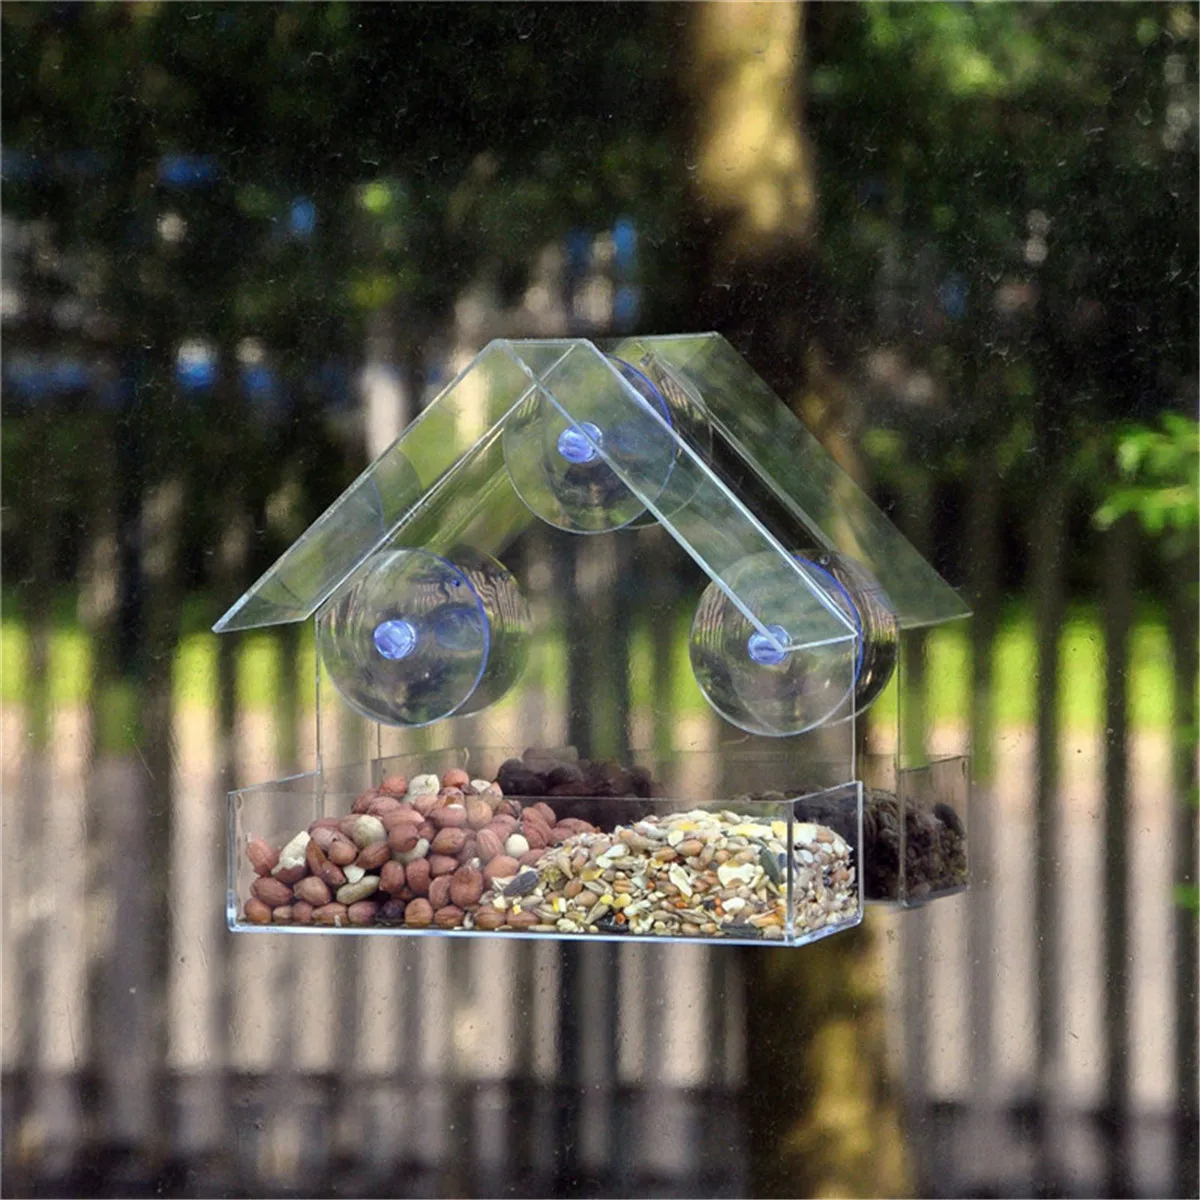 

Window Bird Feeders Hot Sale Clear Glass Window Viewing Bird Feed Hotel Table Seed Peanut Hanging Suction For Pet Bird